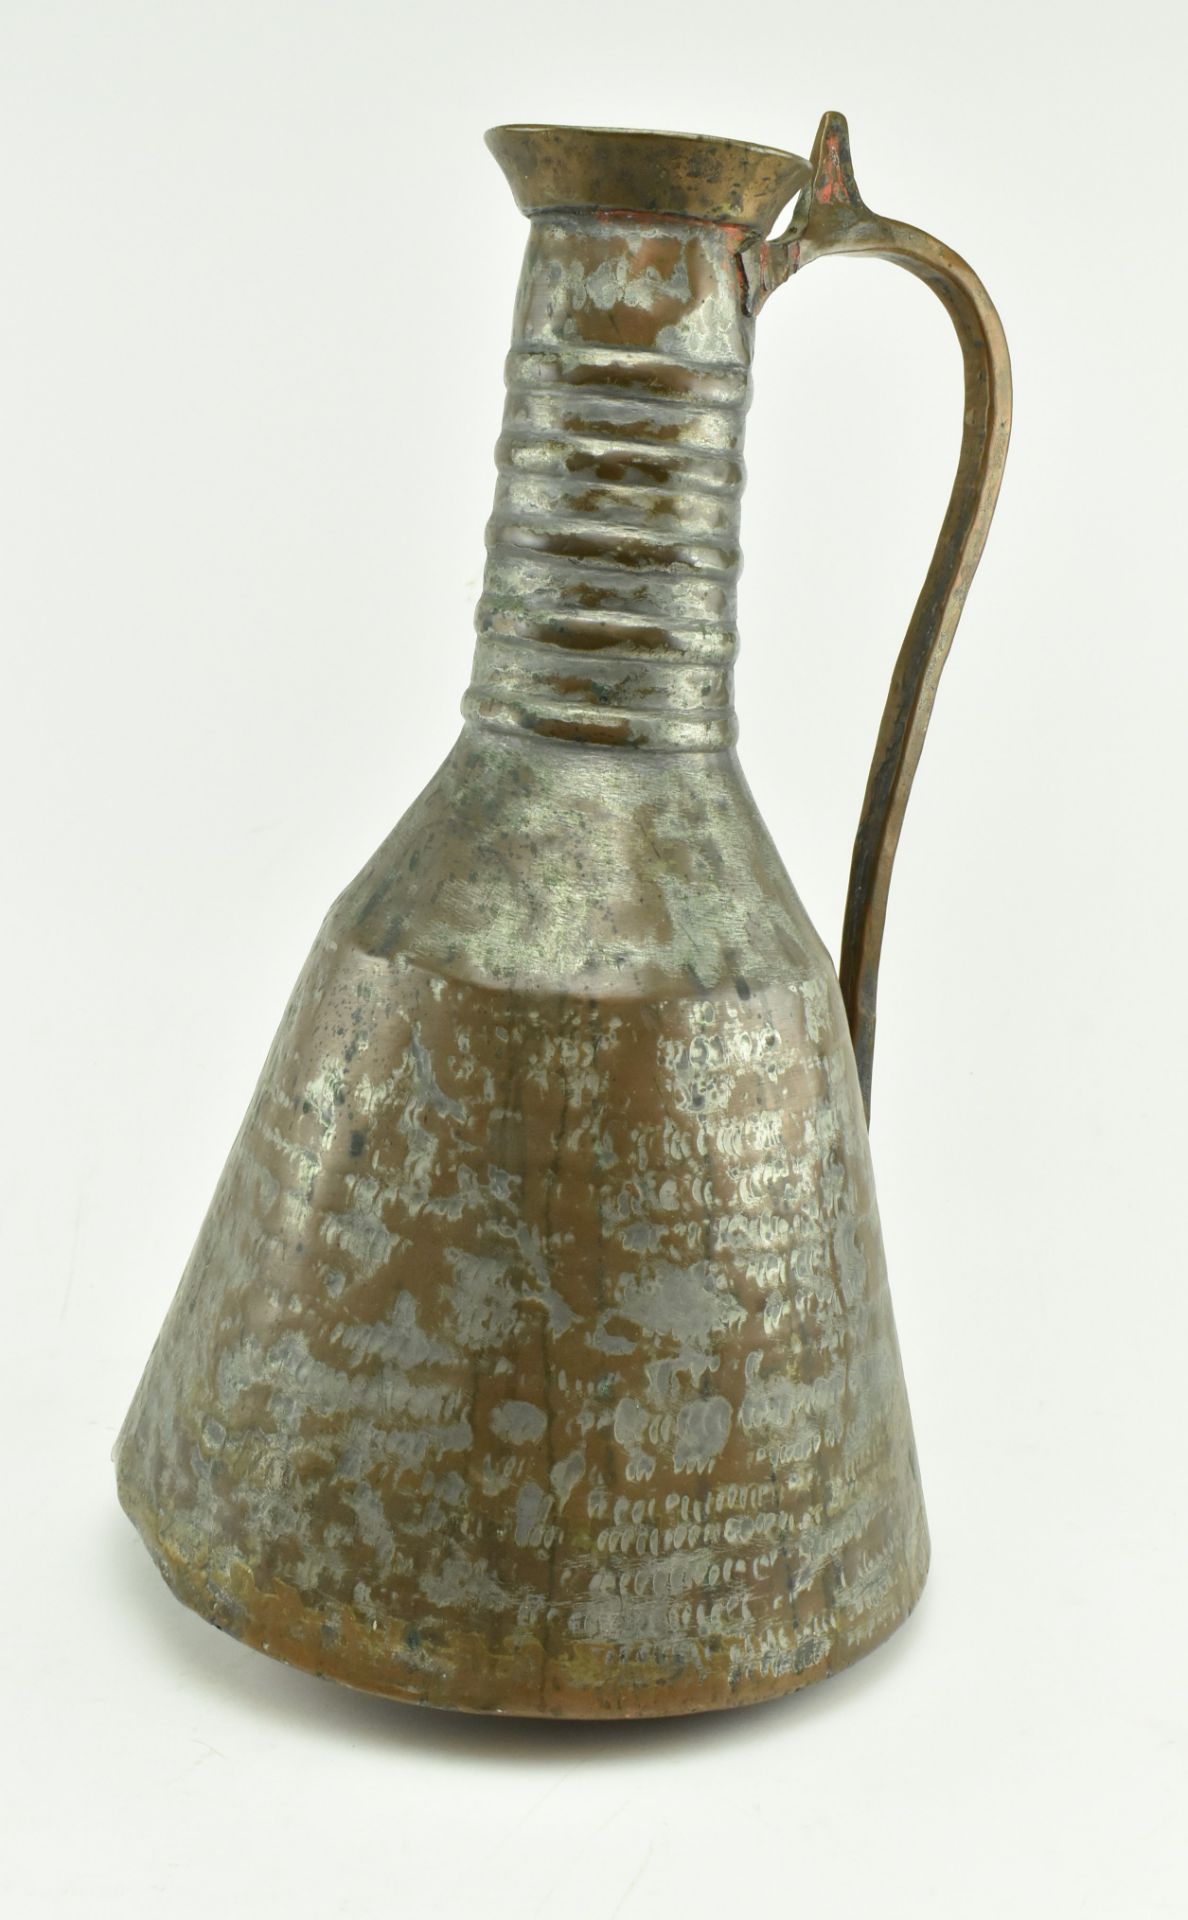 19TH CENTURY MIDDLE EASTERN OTTOMAN HAMMERED COPPER EWER